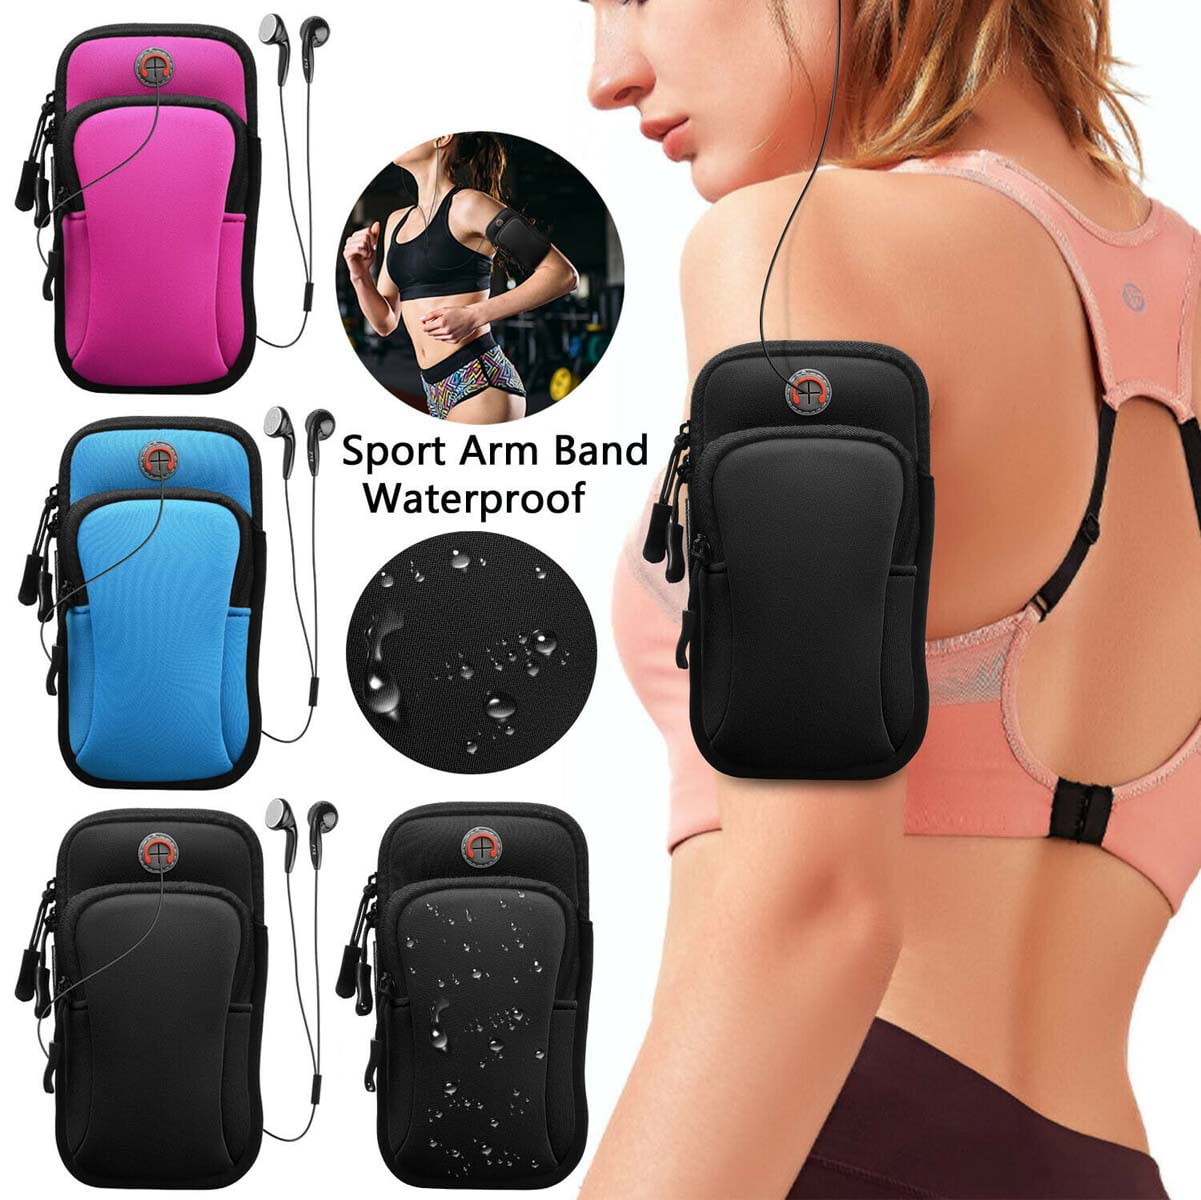 Sports Running Jogging Gym Armband Arm Band Case Cover Holder For iPhone 6 